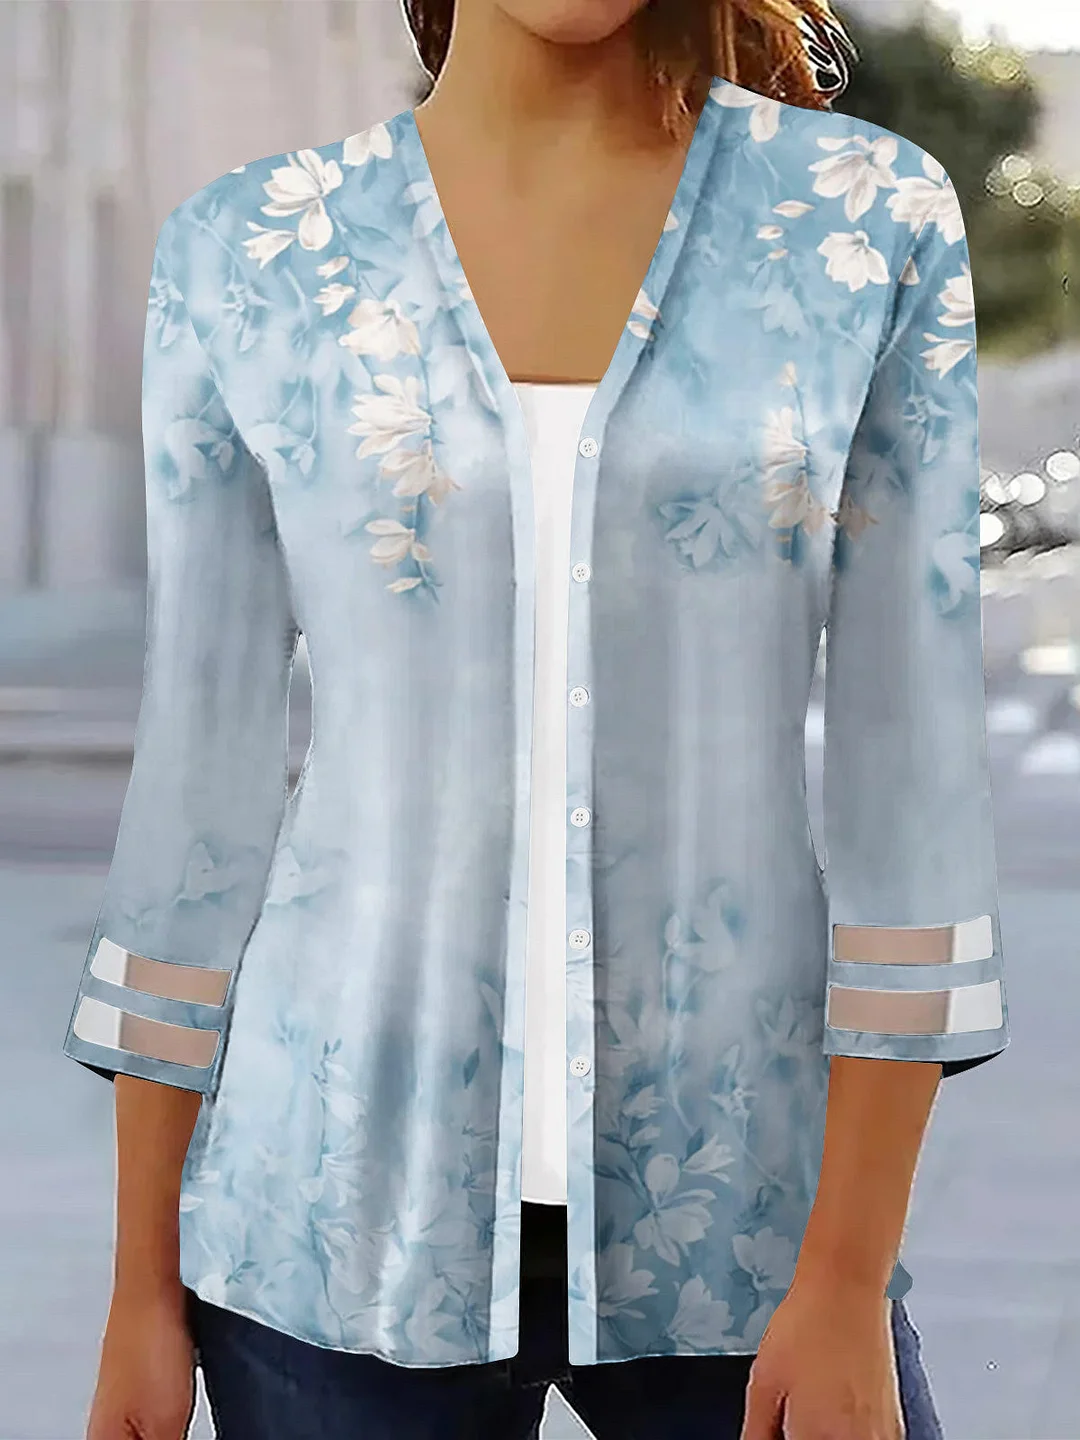 Women's 3/4 Sleeve V-neck Floral Printed Cardigan Top